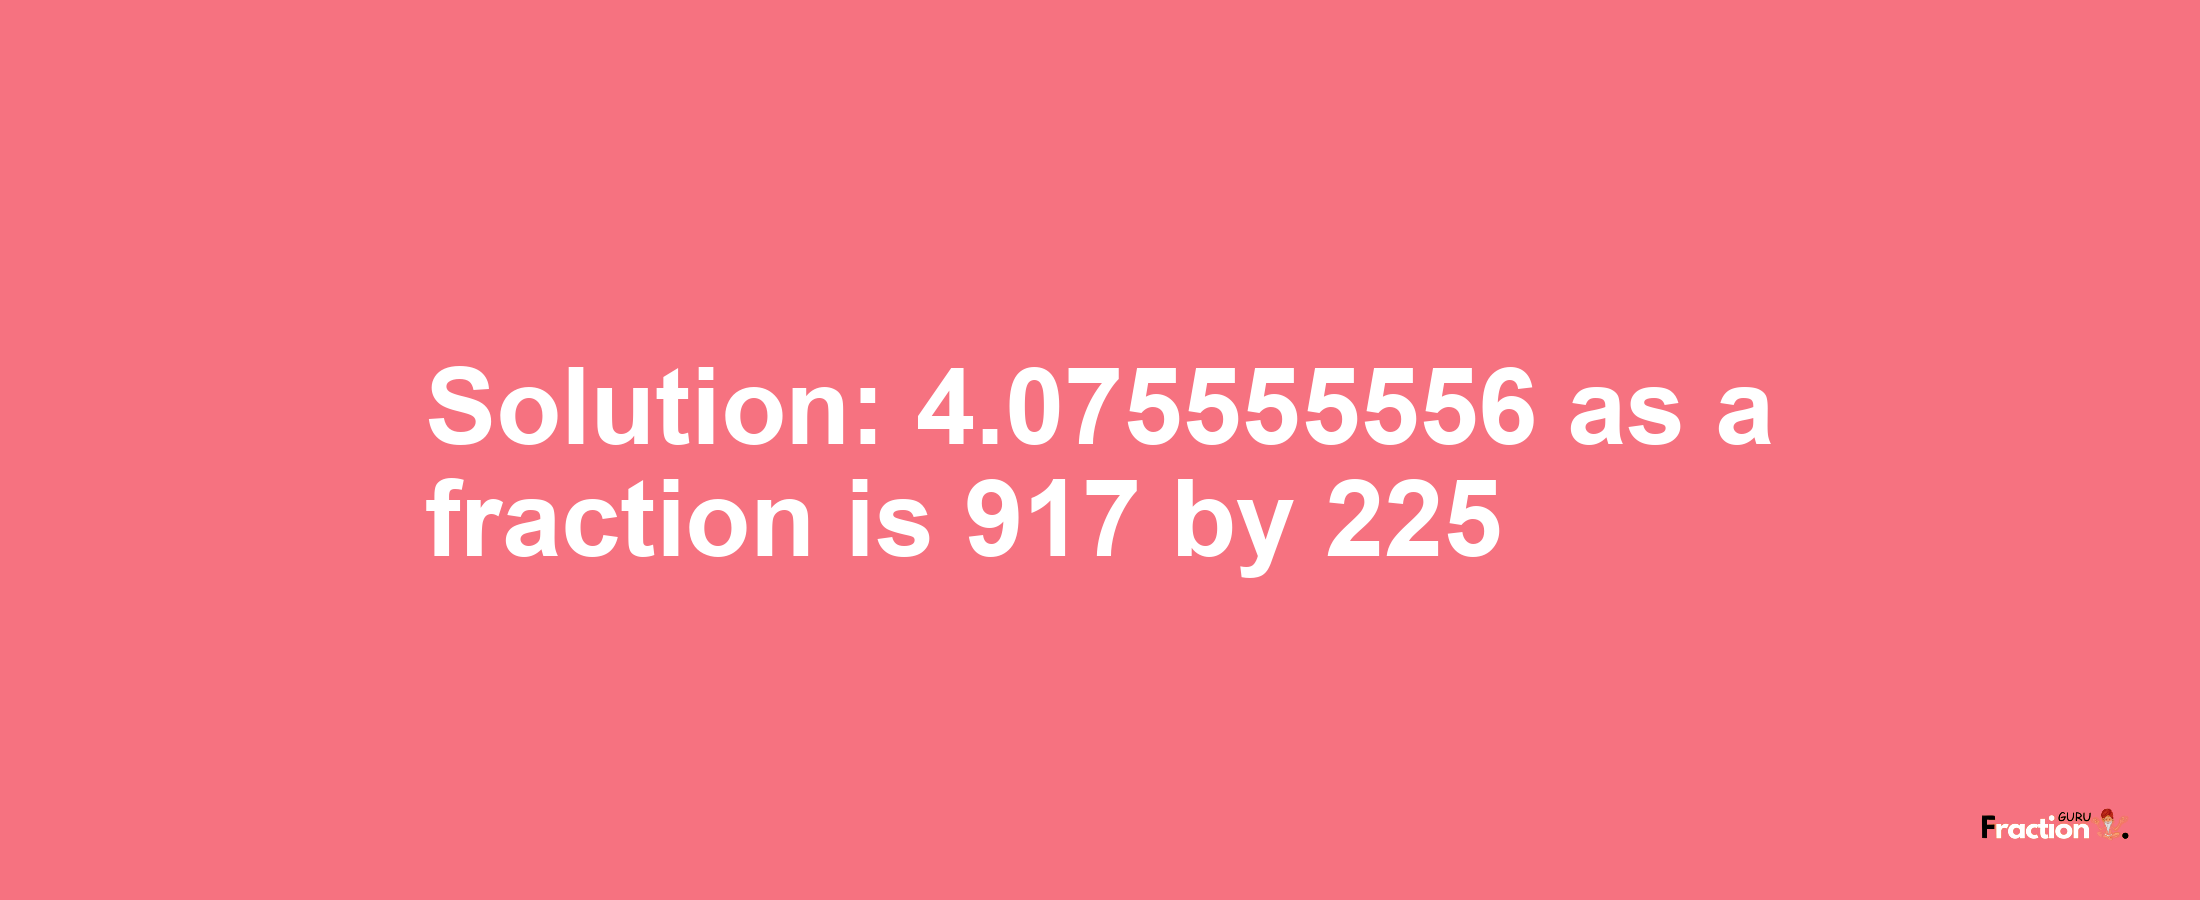 Solution:4.075555556 as a fraction is 917/225